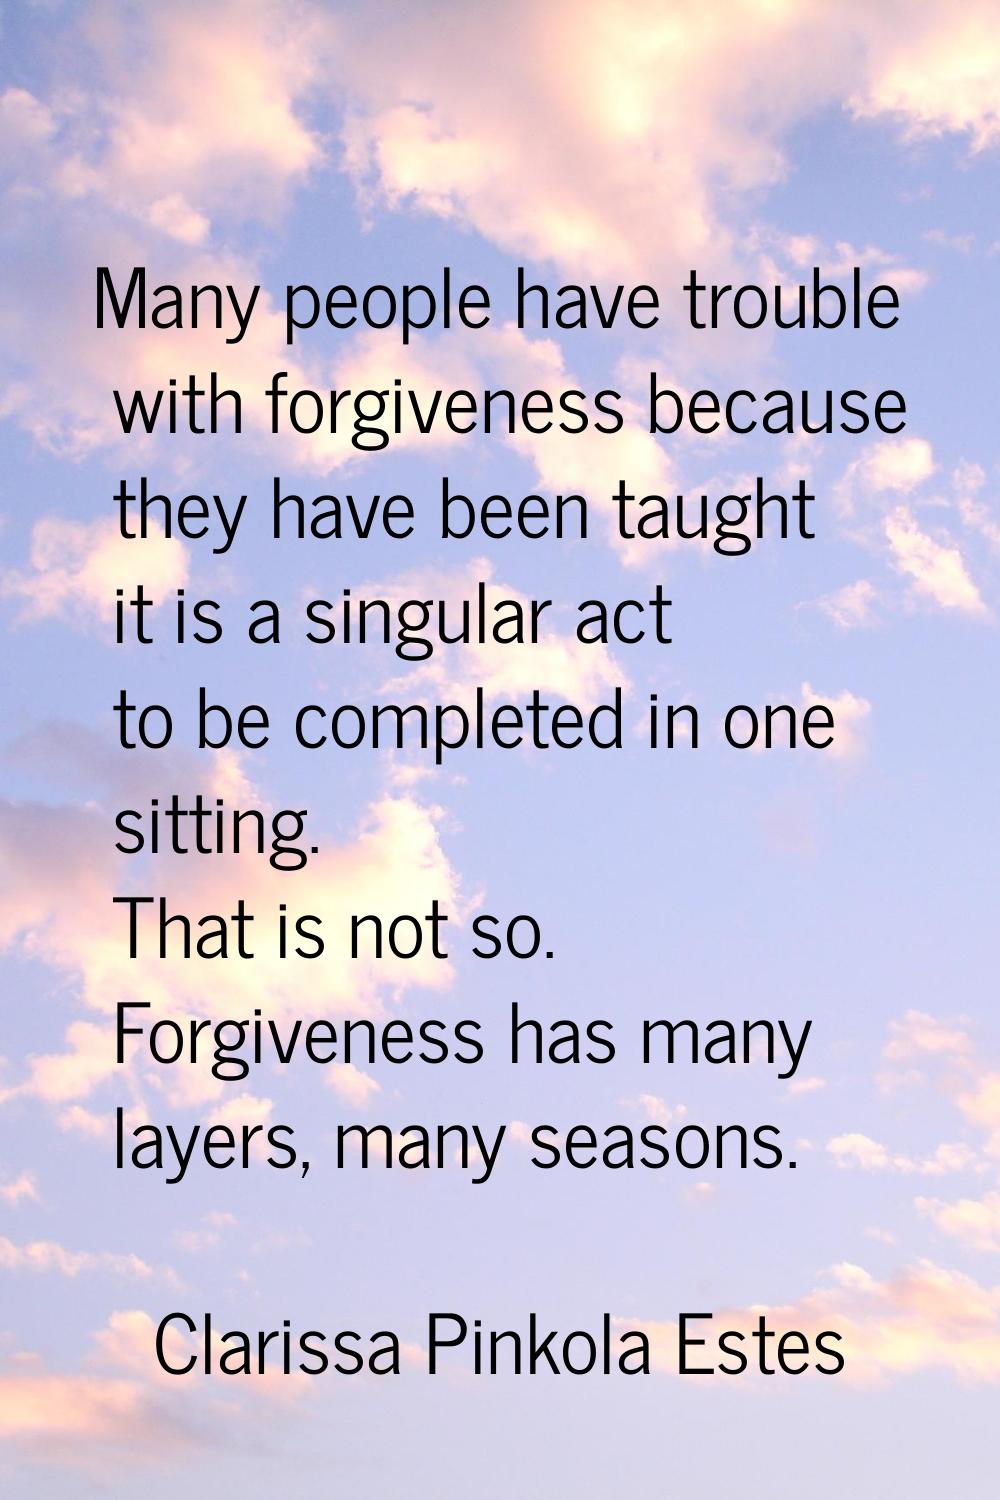 Many people have trouble with forgiveness because they have been taught it is a singular act to be 